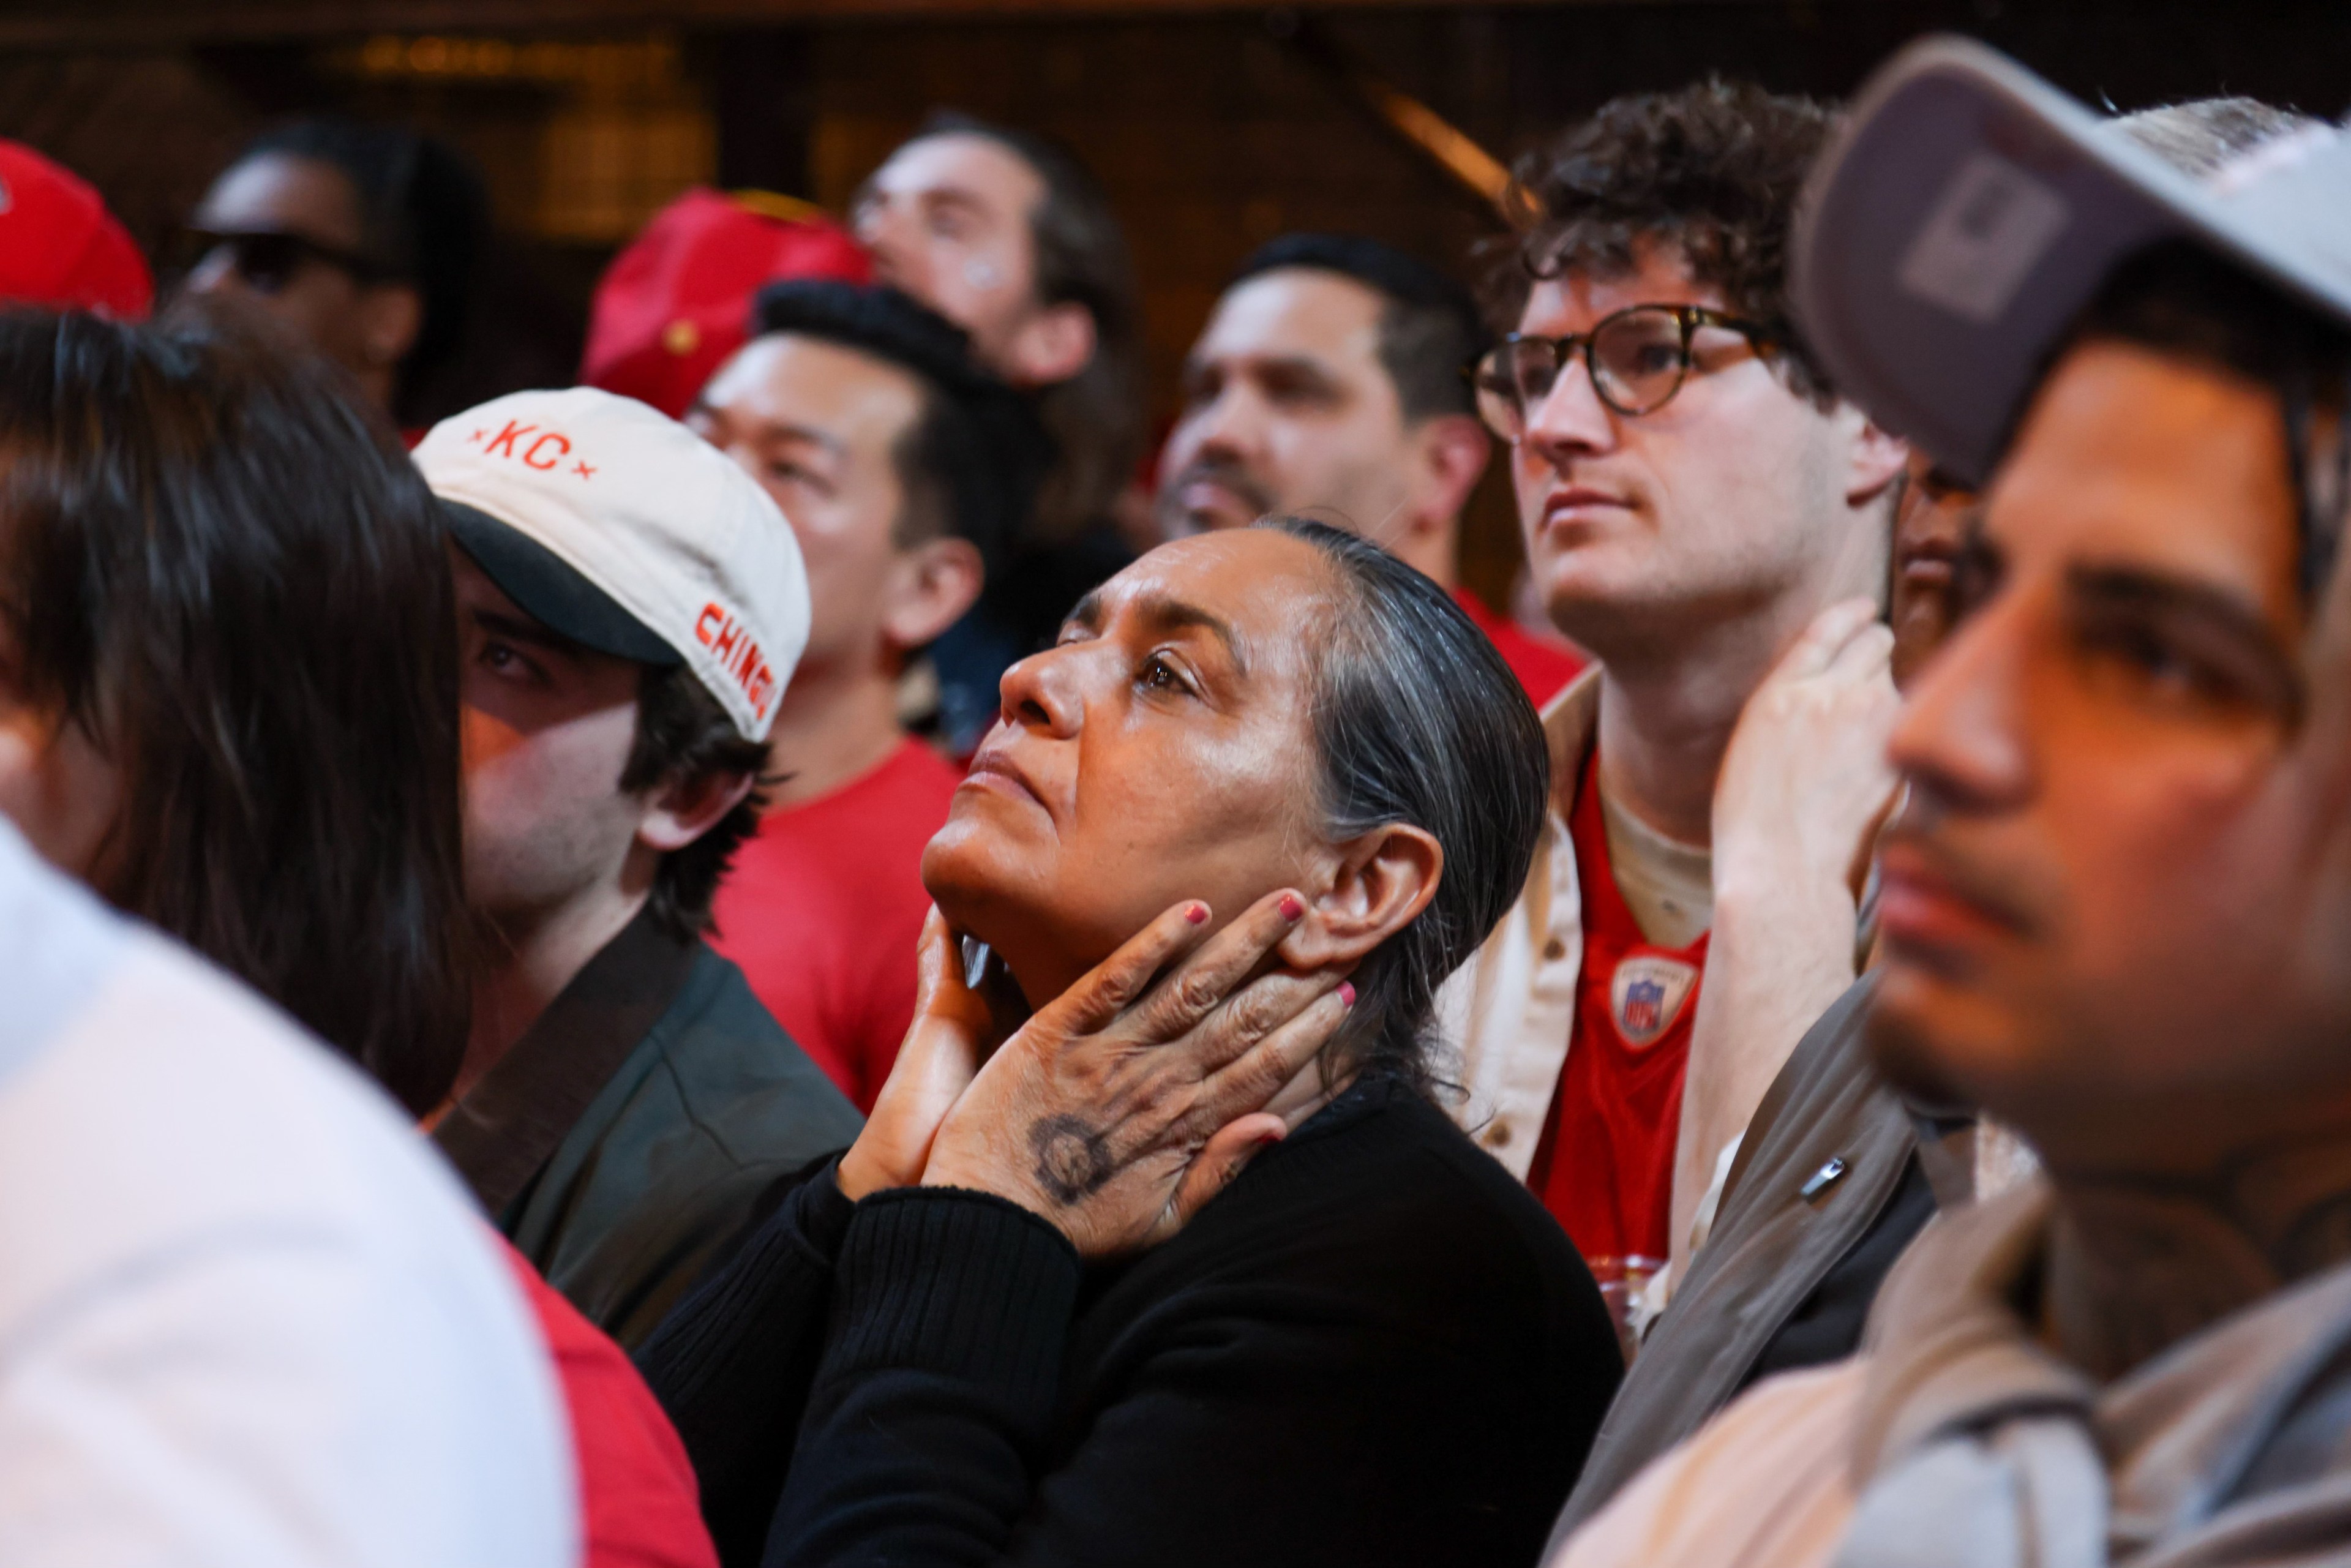 A crowd of people, intently looking upwards, with some wearing red attire and caps. A woman stands out with her hands clasped at her neck.